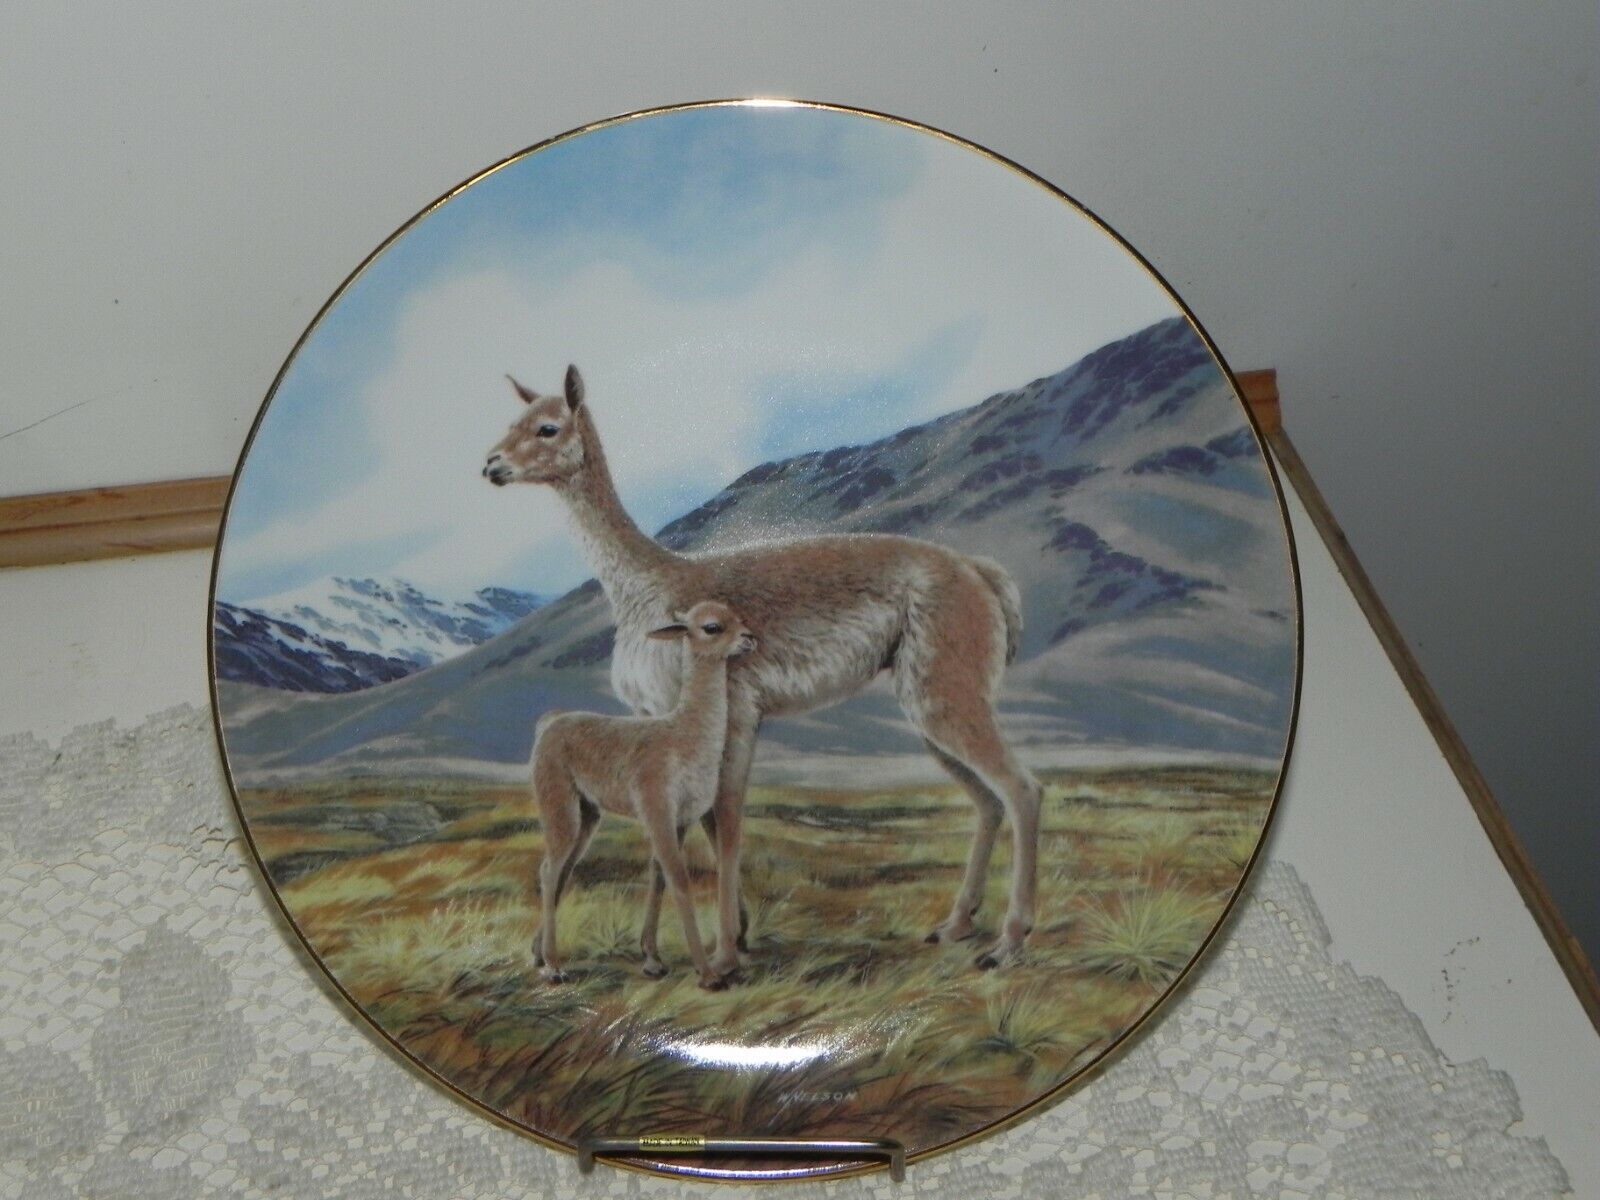 Will Nelson Endangered Species 10-piece Plate Set by set with box/papers